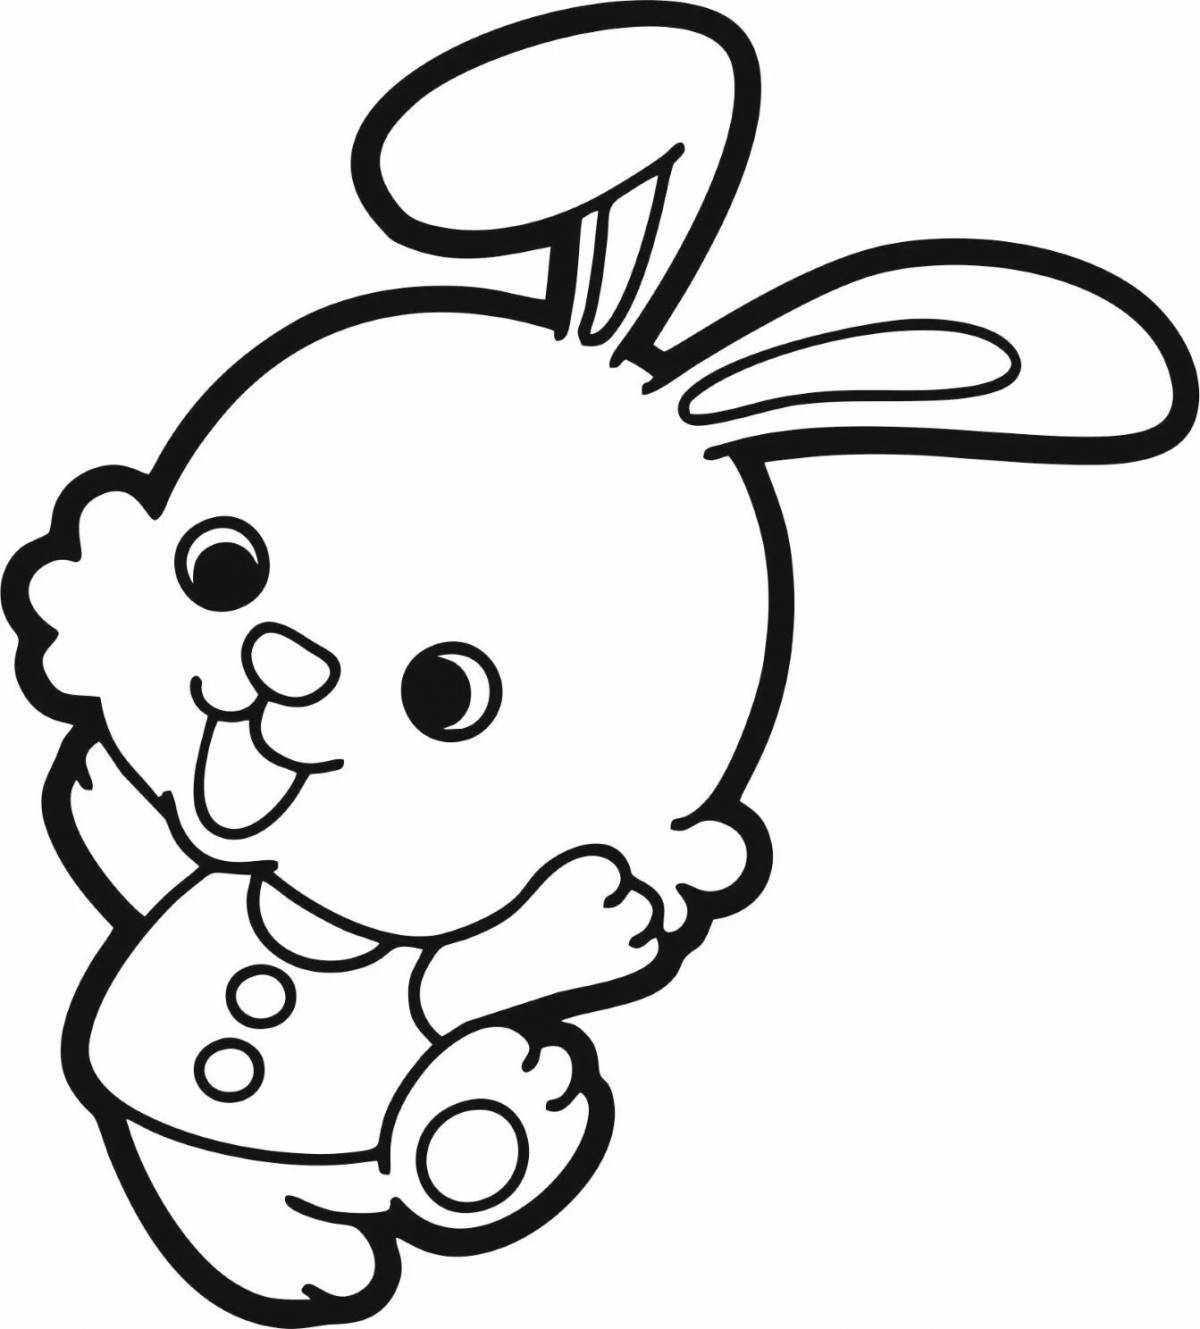 Cute bunny drawing for kids